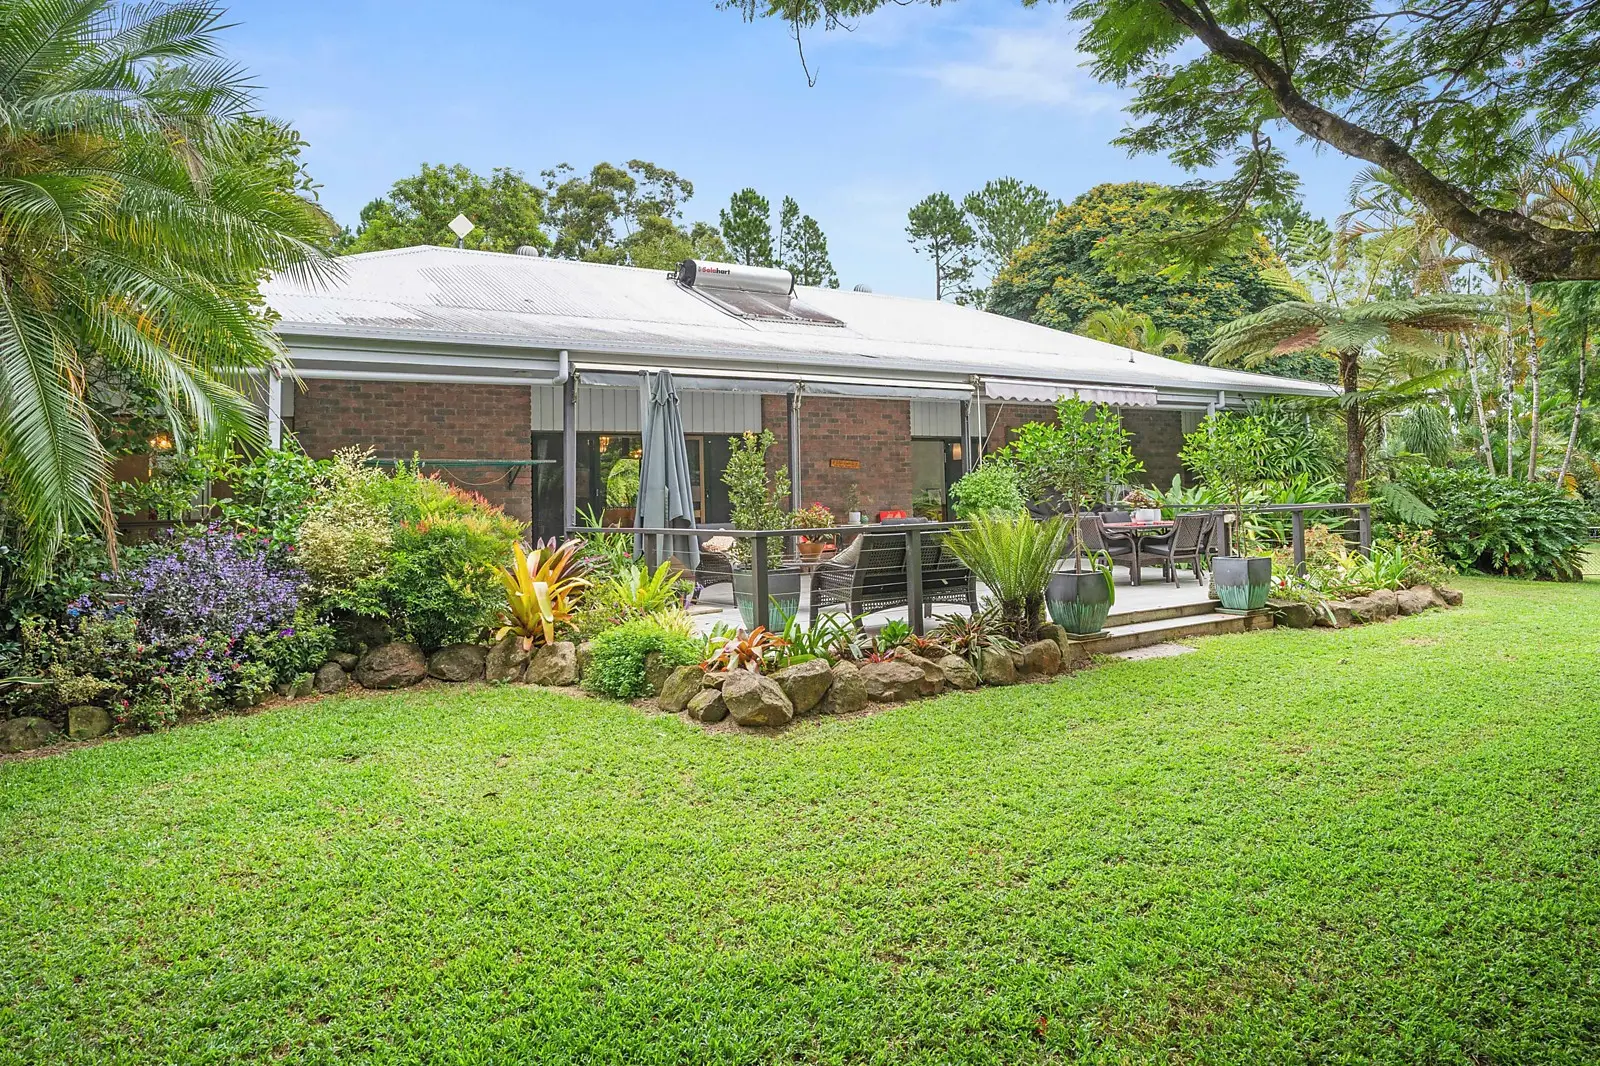 Photo #1: 421 Booyong Road, Booyong - Sold by Sydney Sotheby's International Realty